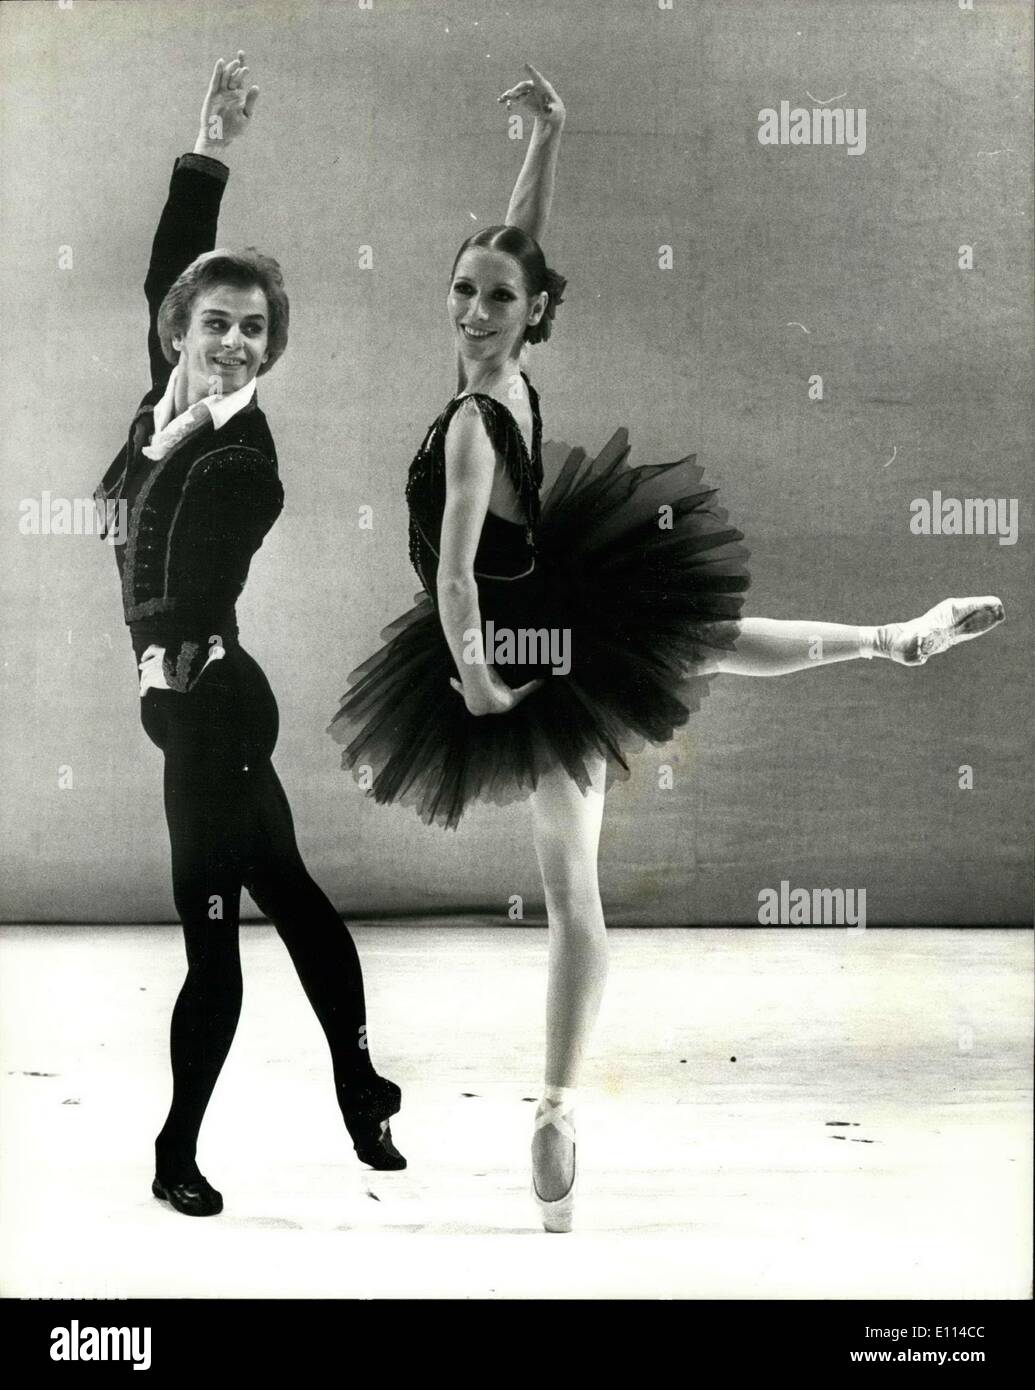 Nov. 05, 1975 - Russian Dancers to Dance Together for the First Time in This Country For BBC Television: Russian Dancers Natalia Makarova, and Mikhail Barydhnikov dance together for the first time in this country for BBC's television's ''Gala Performances'' The recording takes place at Sadler's Wells Theater tomorrow, and the Performances will be shown on BBC-1 at the end of the year. Both dancers are former members of the Kirov Ballet, and are currently dancing with the Royal Ballet- but not together Stock Photo